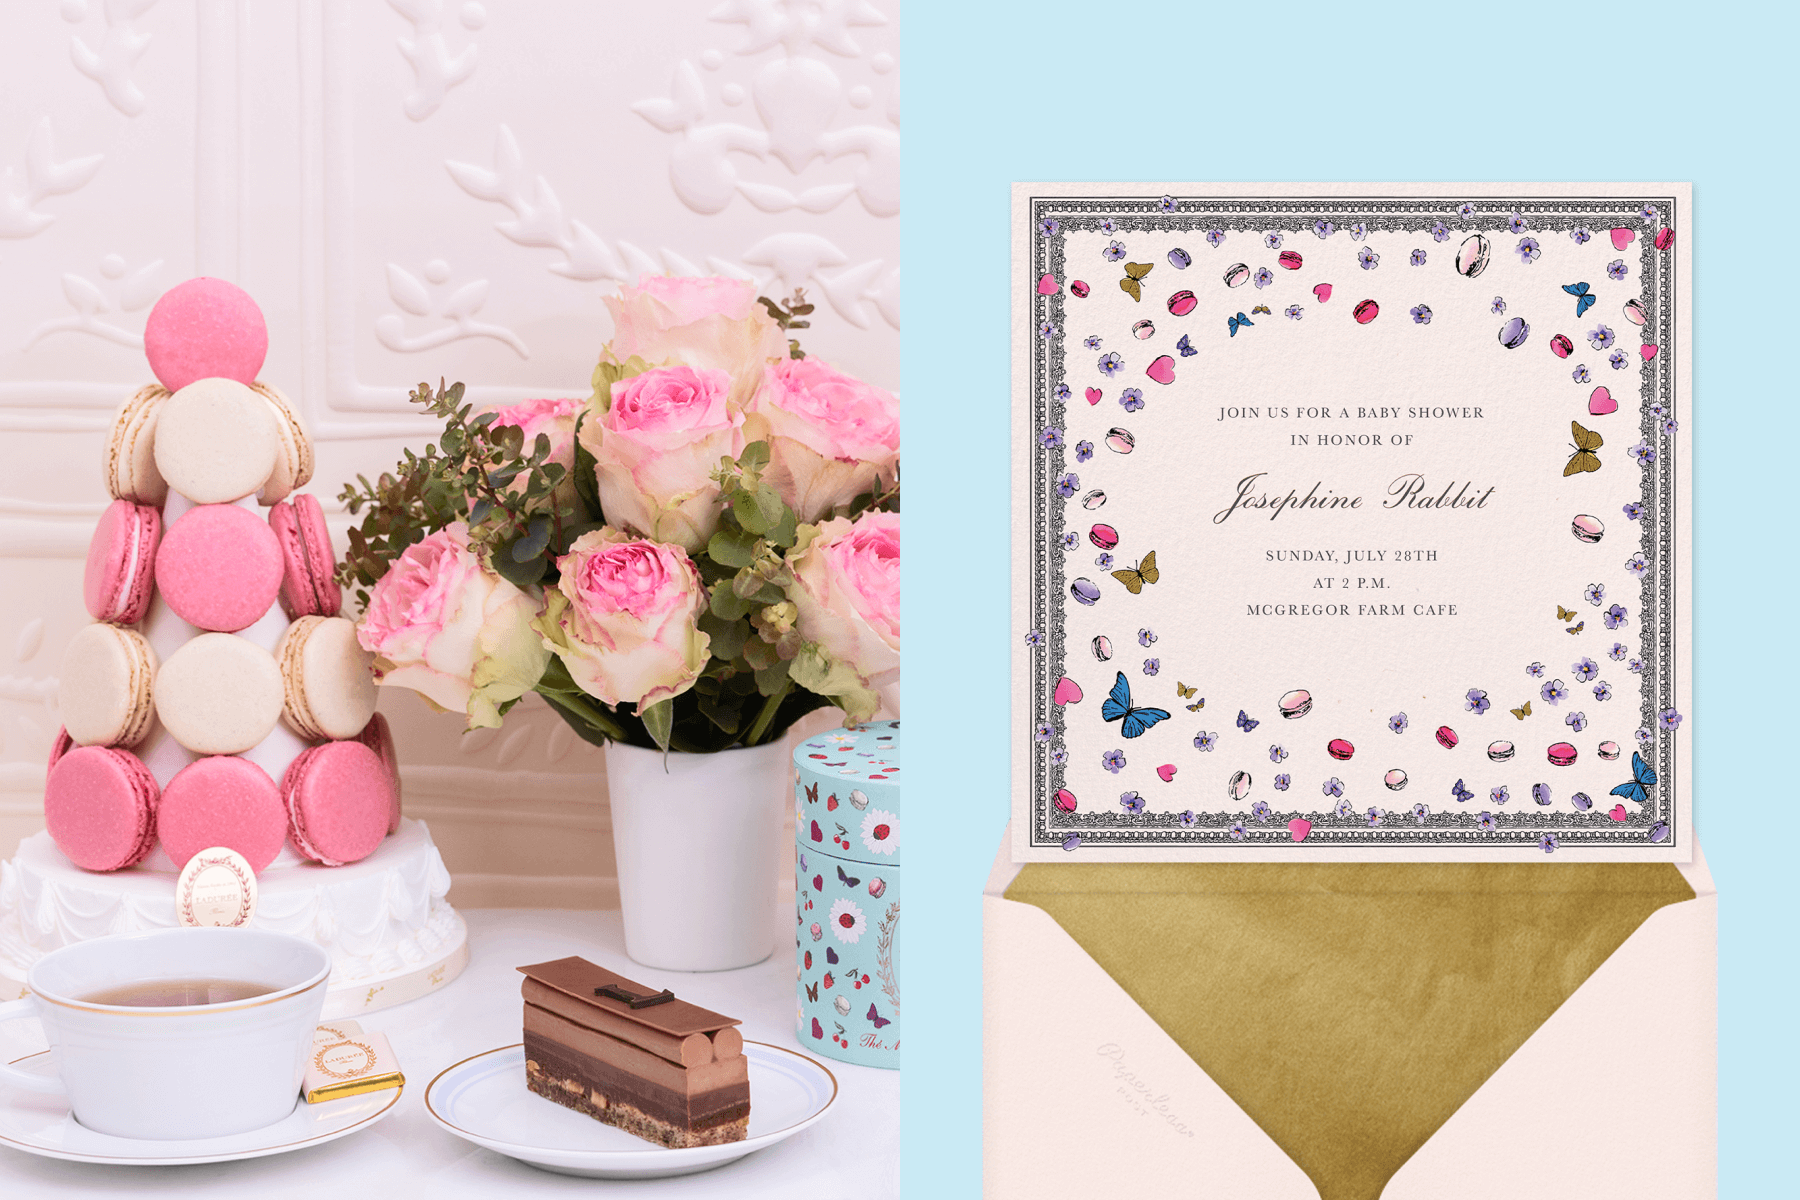 Left: Elegantly decorated french desserts with tea and flowers; Right: A baby shower invitation featuring illustrative butterflies and macarons.